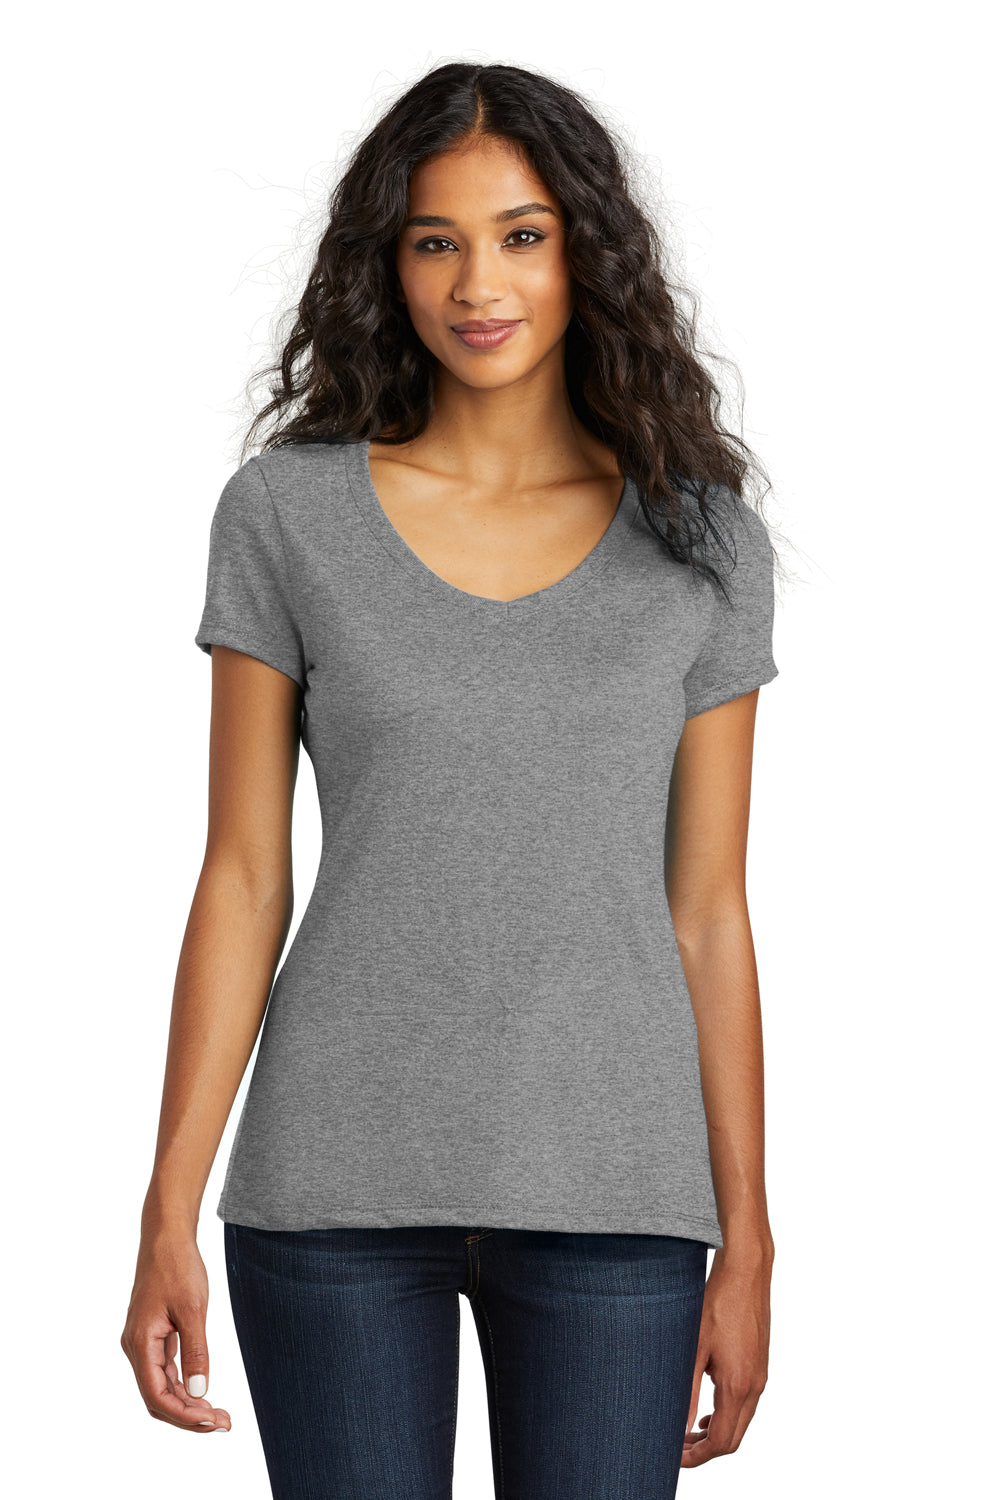 District DM1350L Womens Perfect Tri Short Sleeve V-Neck T-Shirt Grey Frost Front